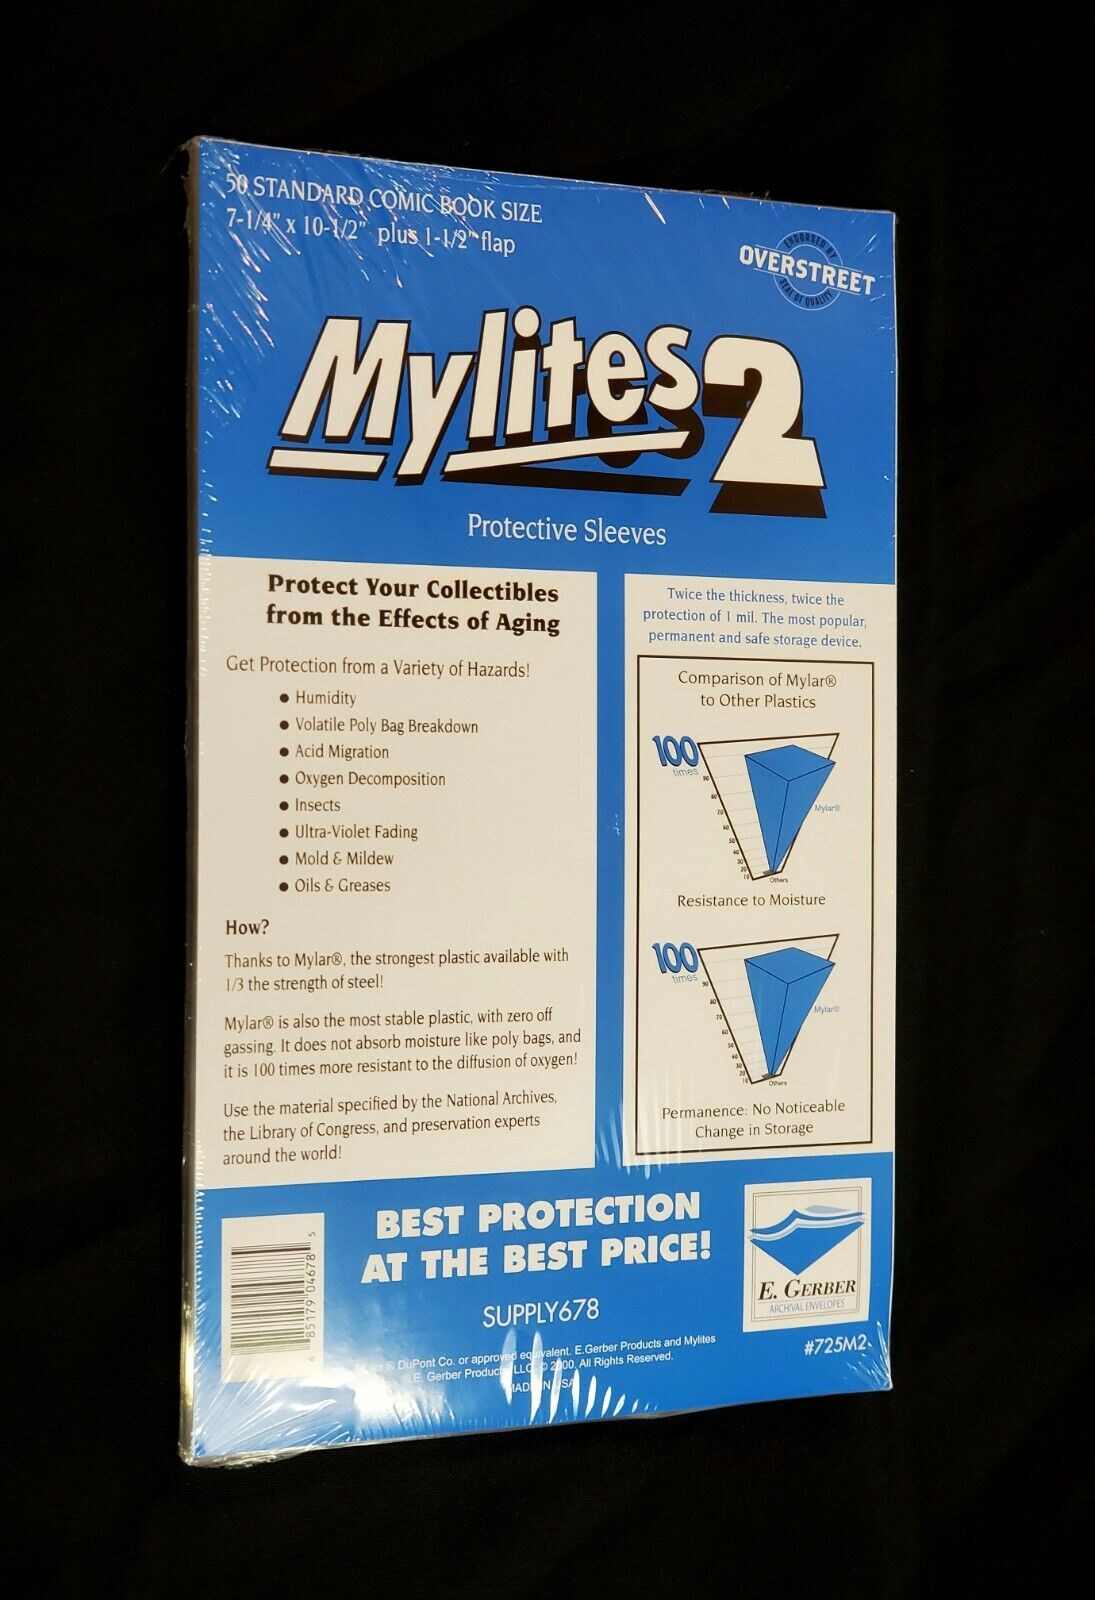 PACK OF 50 E GERBER MYLITES 2 725M2 MYLAR COMIC BAGS STANDARD SILVER BRONZE NEW